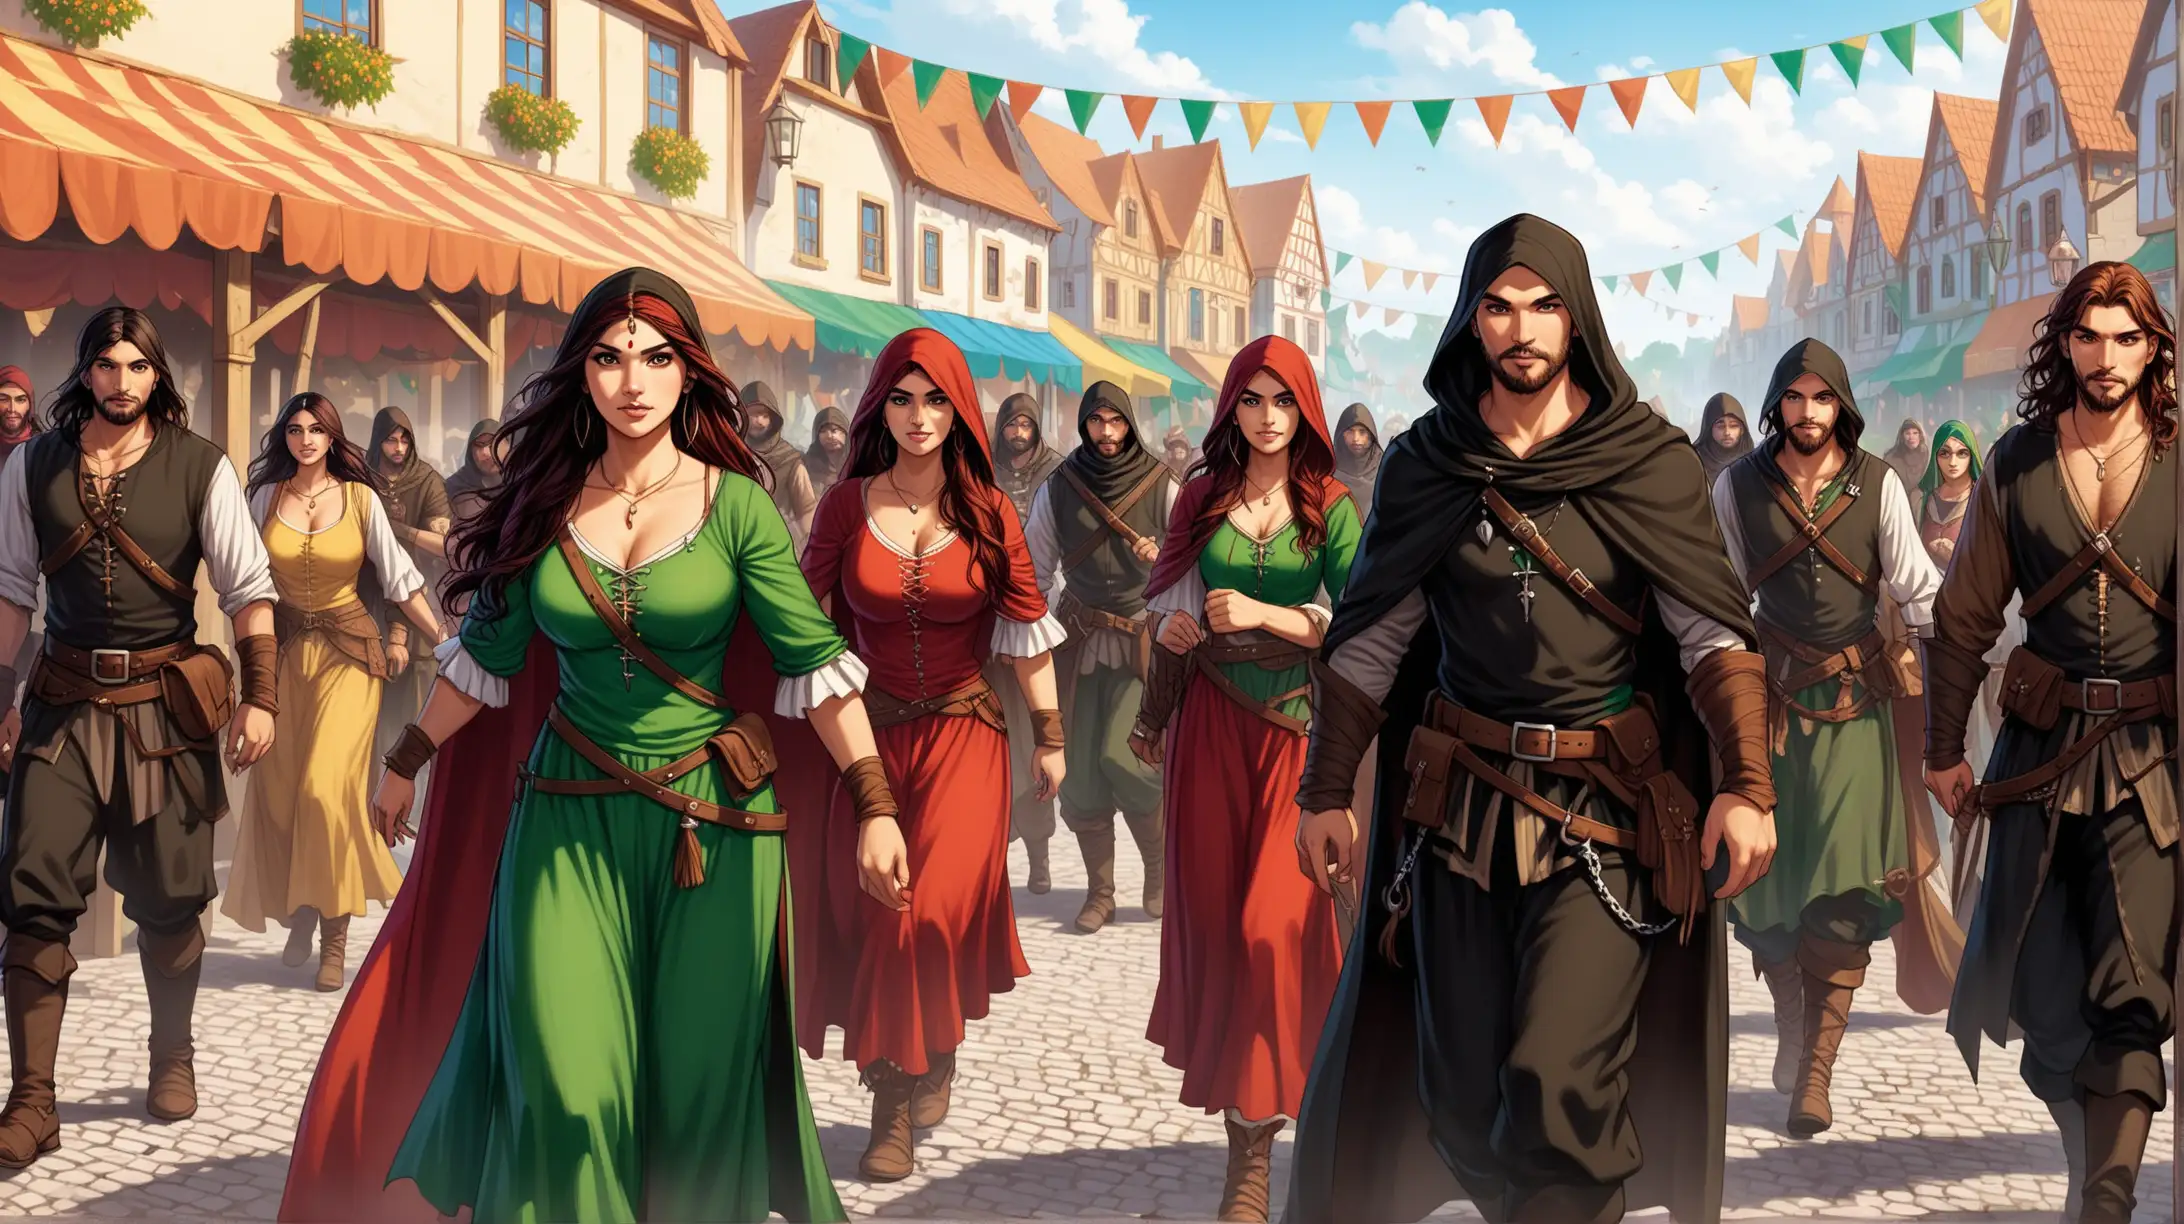 crew of thieves, seers and warlocks, men and women, gypsy Romani Irish, town carnival, Medieval fantasy